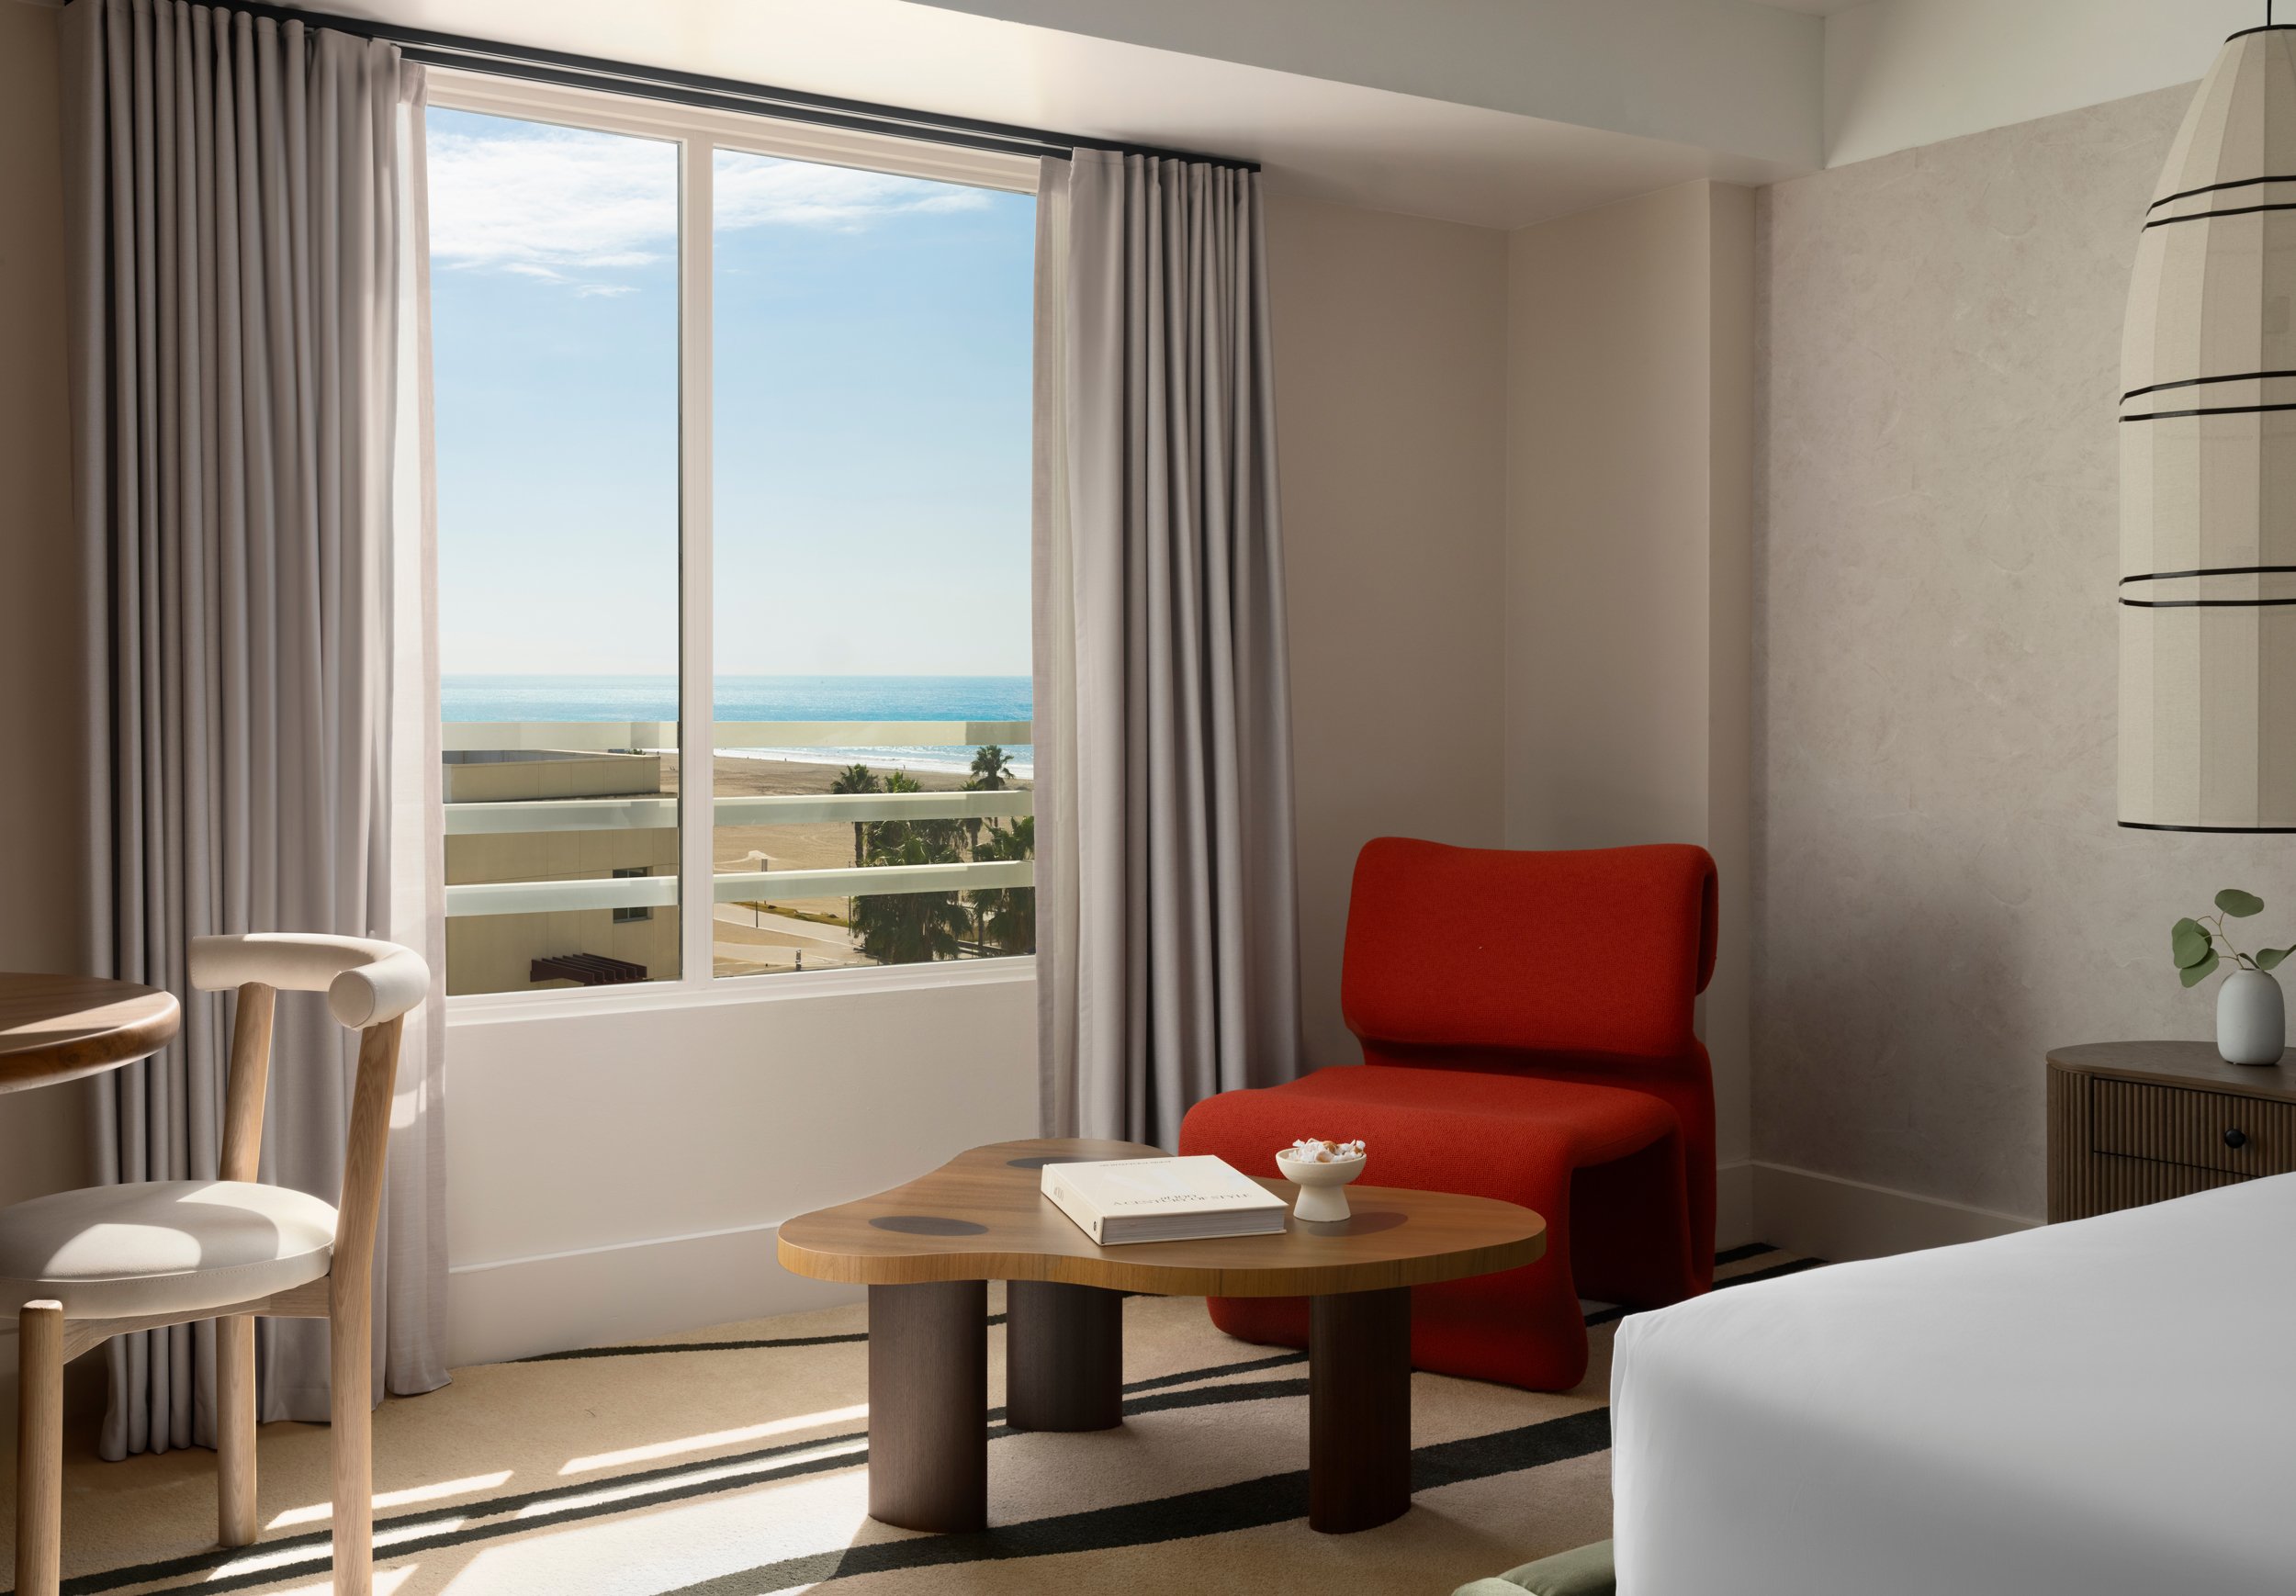 A view of a deluxe double balcony room at the Sandbourne Santa Monica